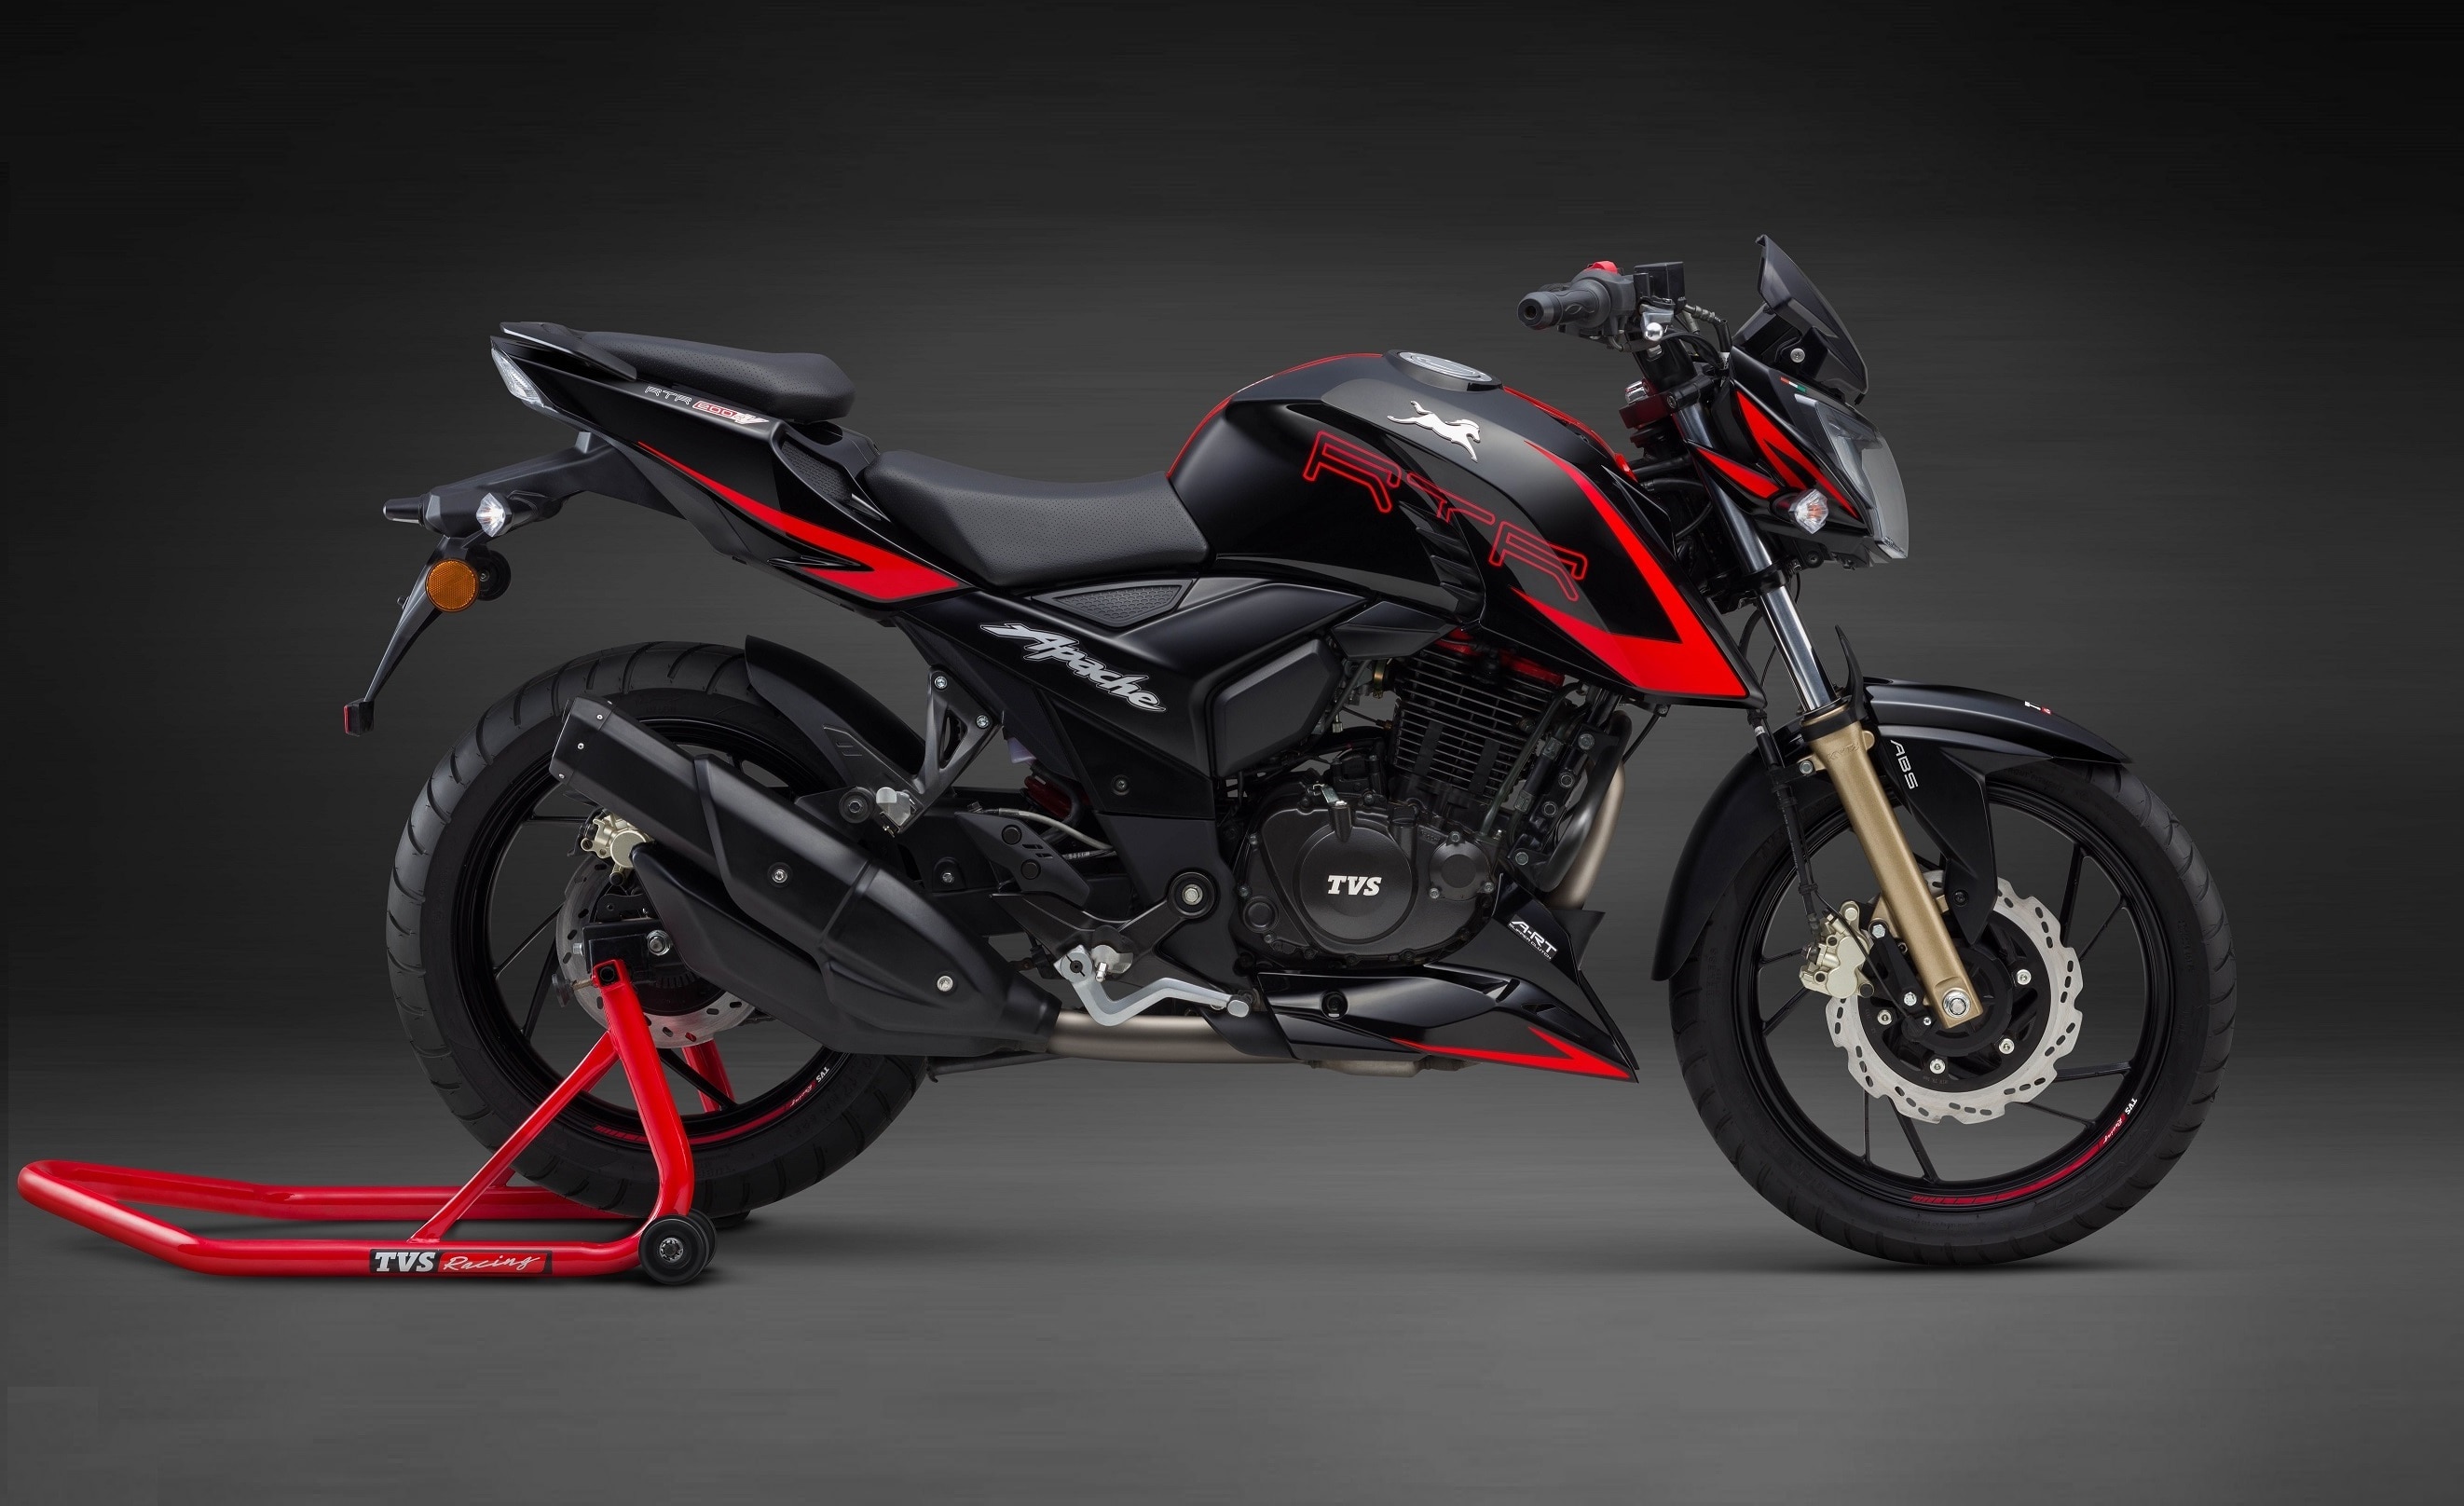 Tvs Apache Rtr 200 4v Racing Edition Launched Price In India Starts At Inr 95 185 India Com